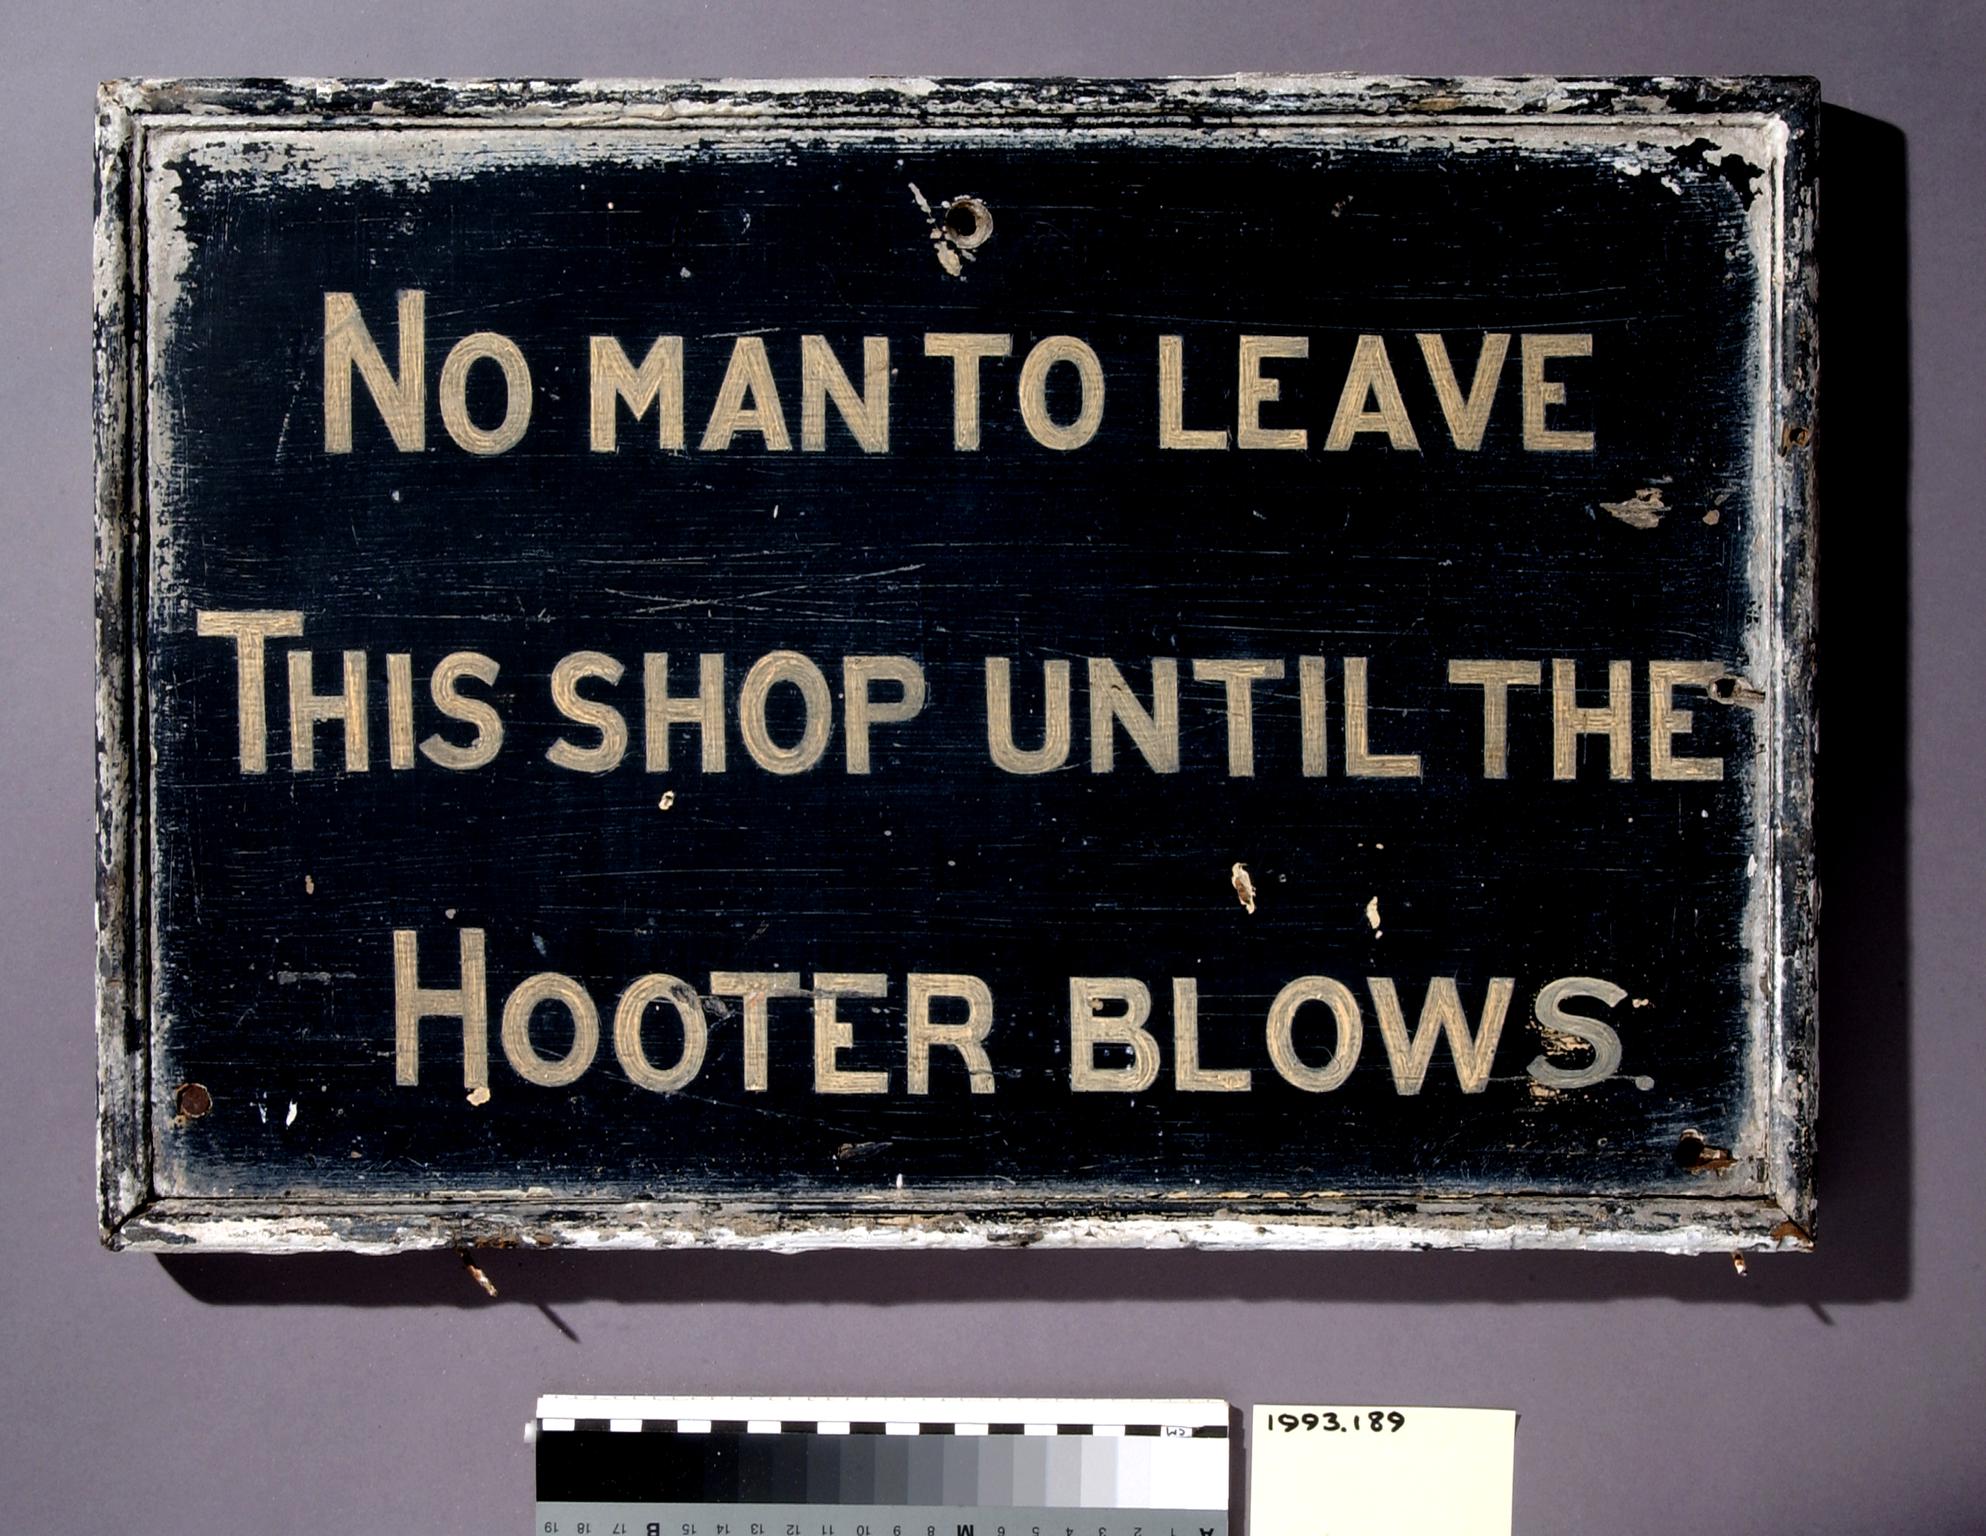 No man to leave this shop until the hooter blows, sign